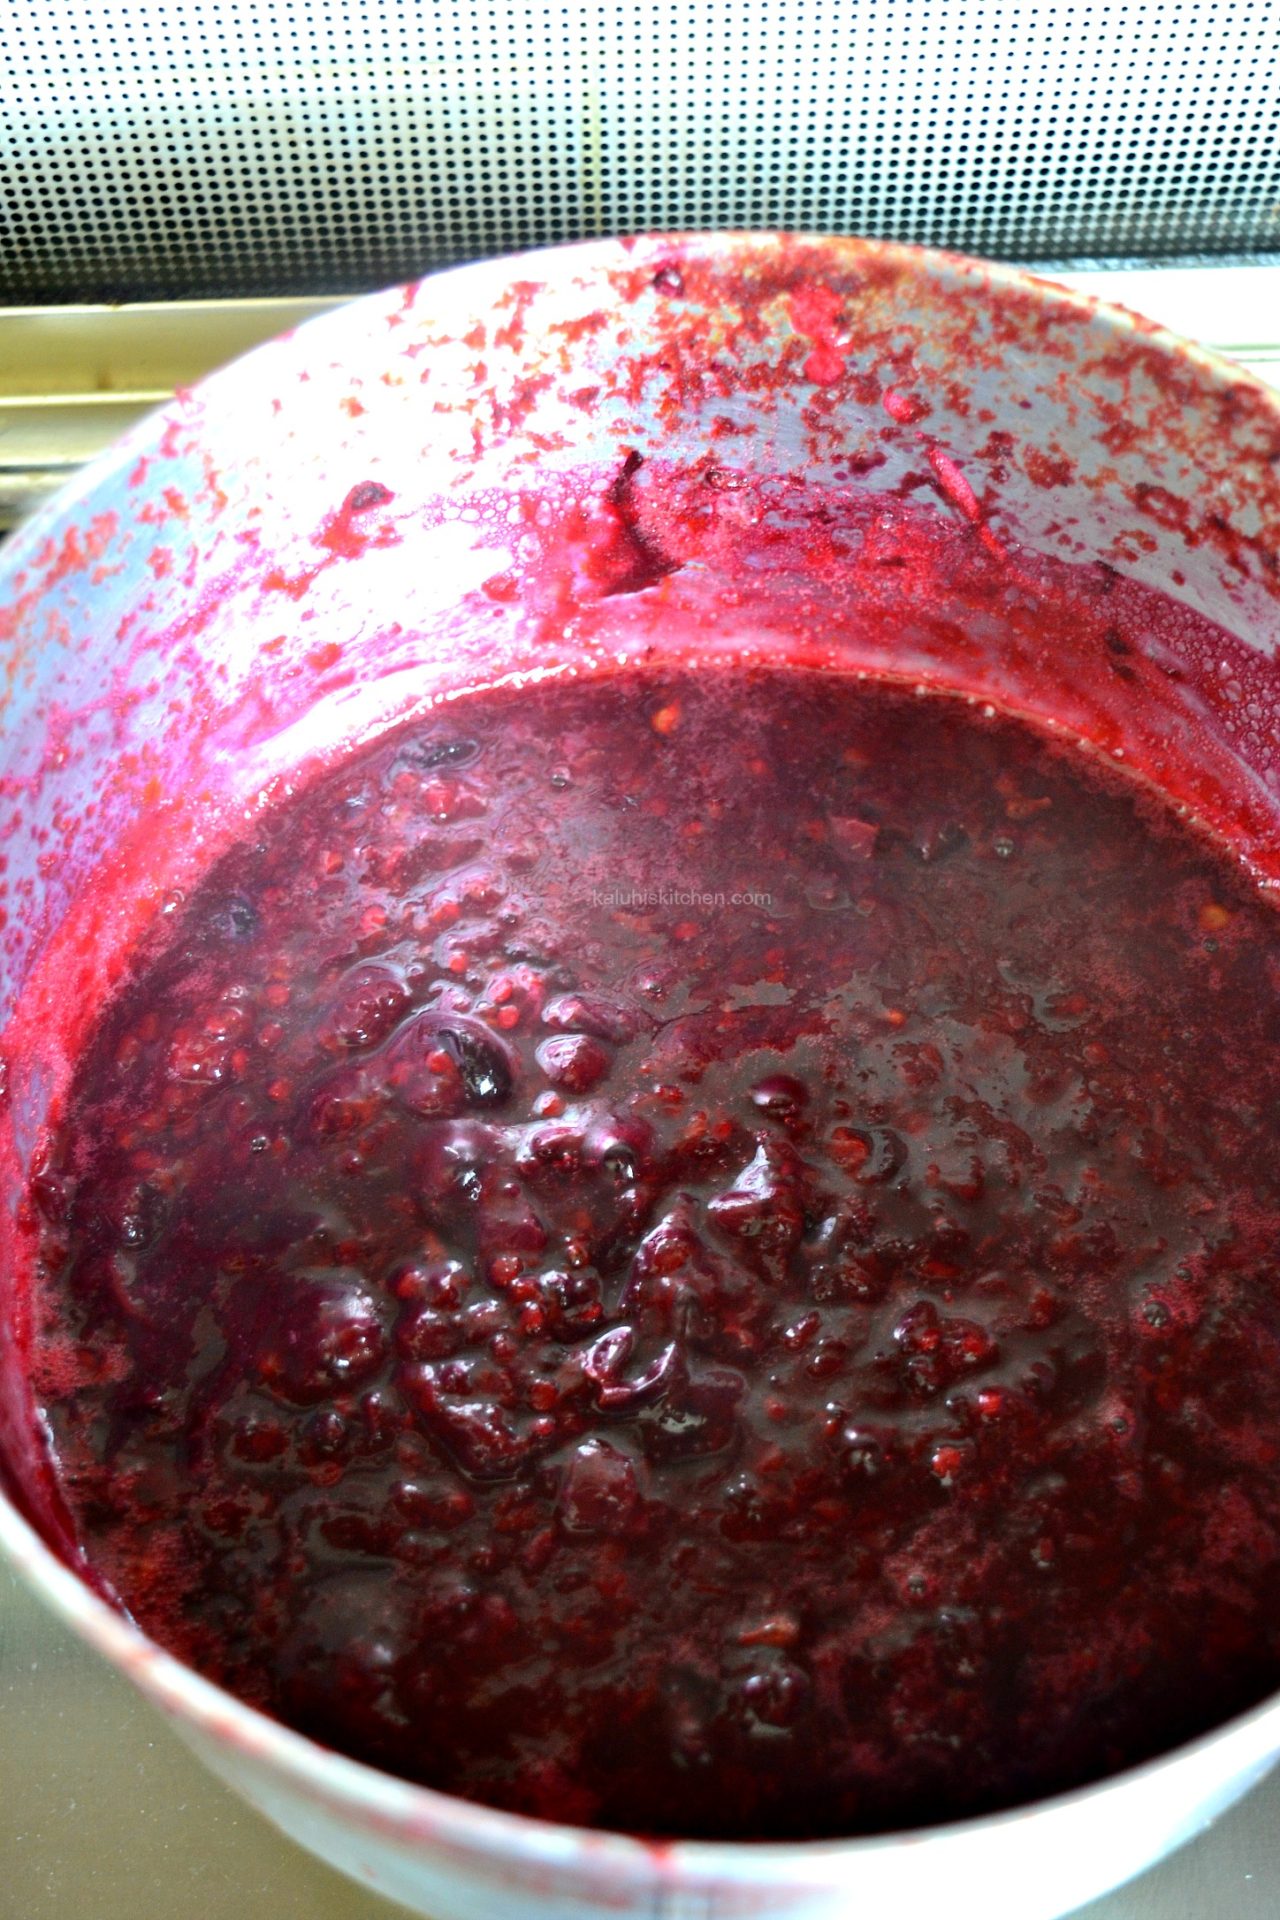 once the jam thickens and wrinkles when placed on a a cold plate, it is done_grape and tree tomato jam_